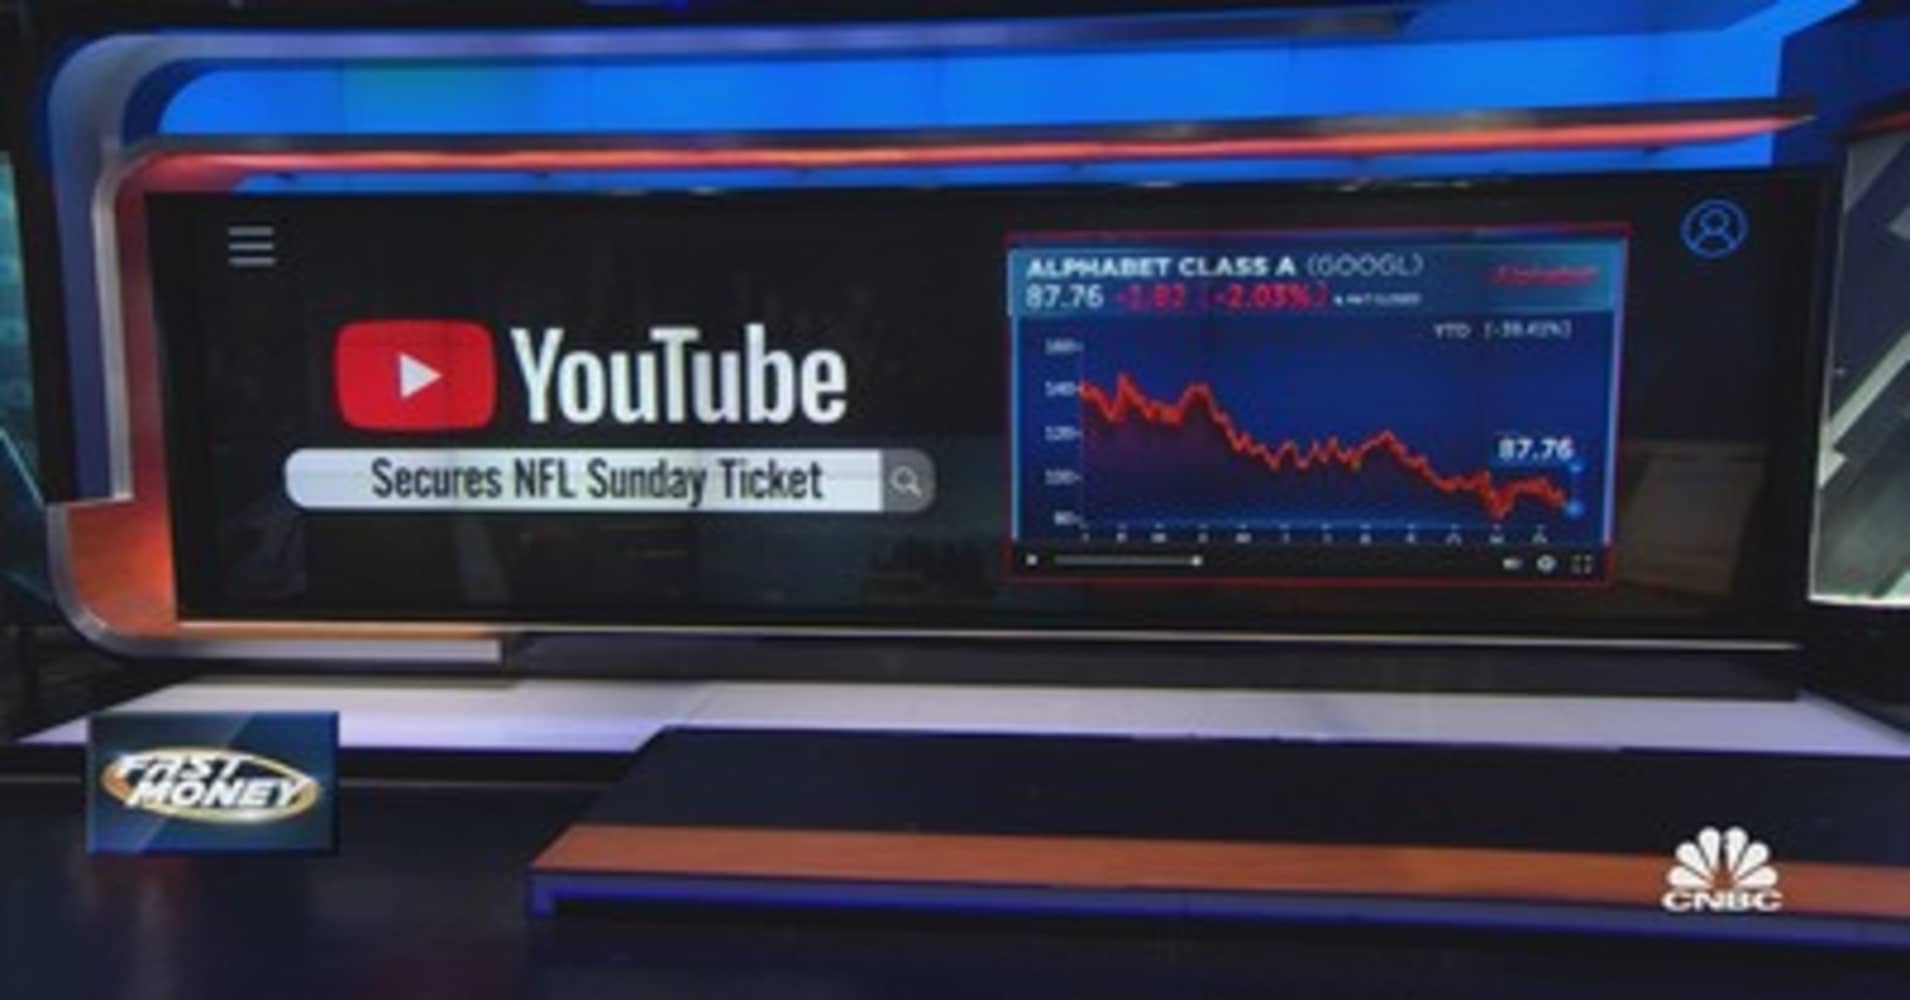 NFL Sunday Ticket offered to cord-cutters